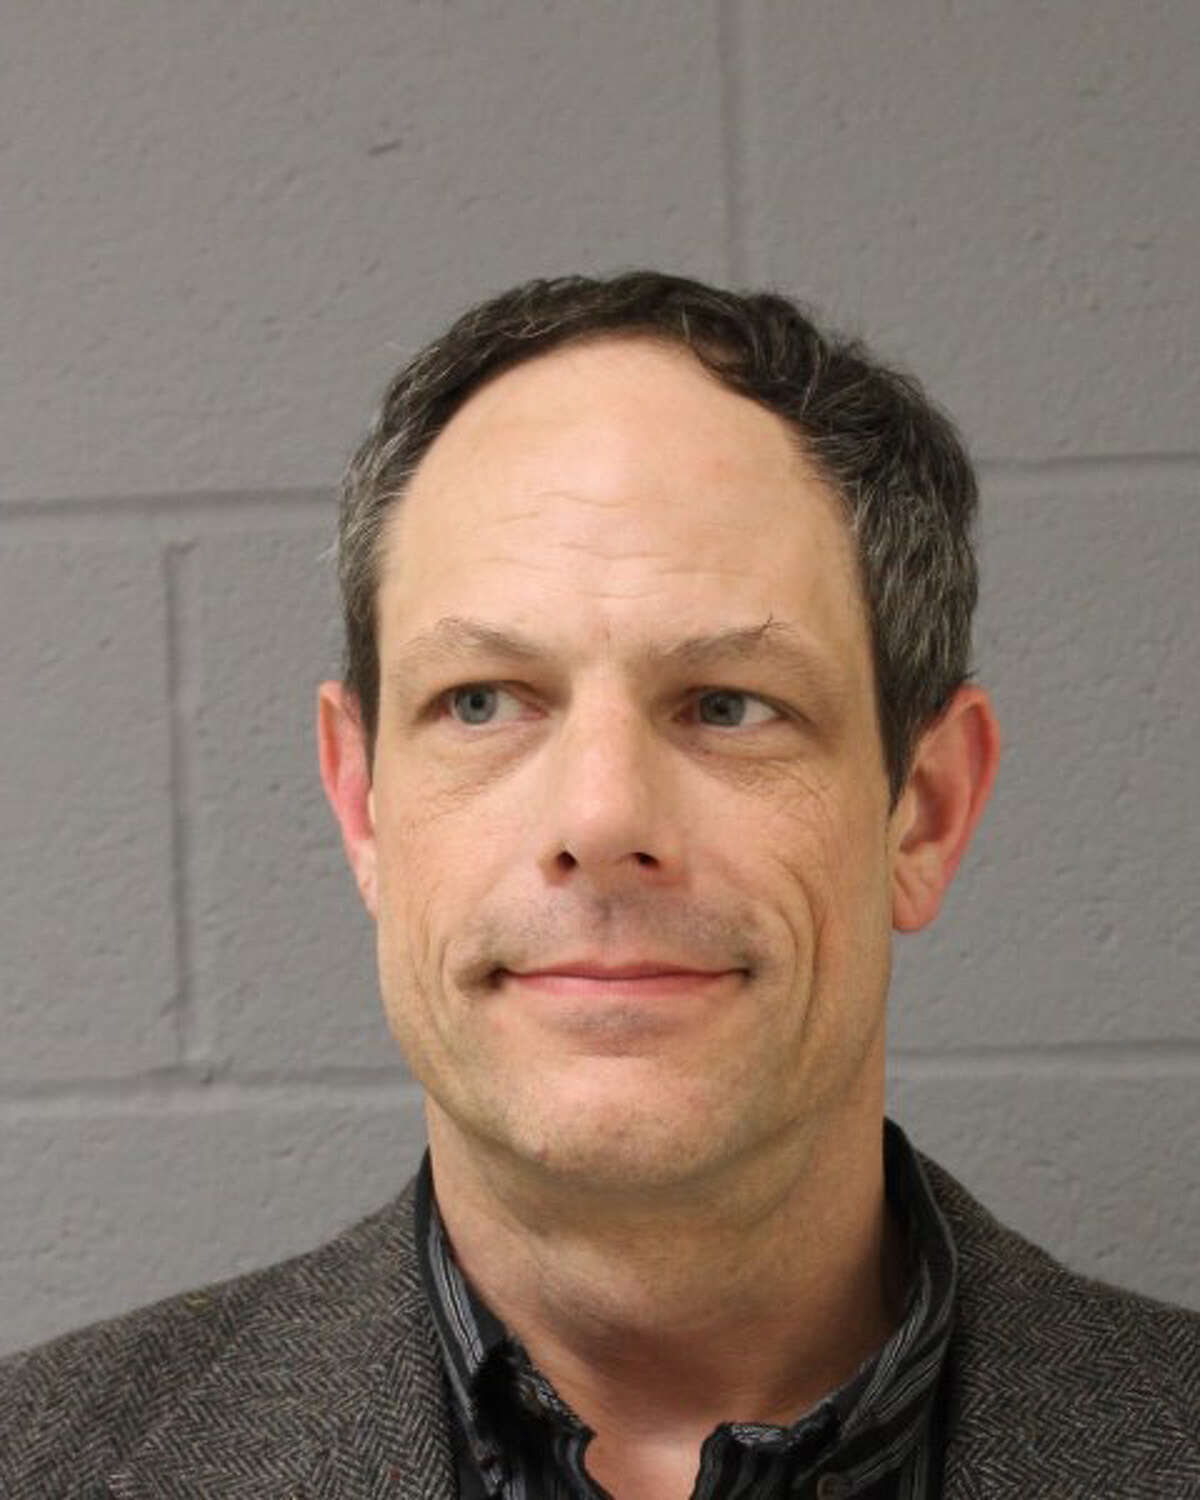 Jason Adams, 46, of Currituck Road, Newtown, was charged Wednesday after police said he brought a gun to work. Adams teaches at Newtown Middle School.